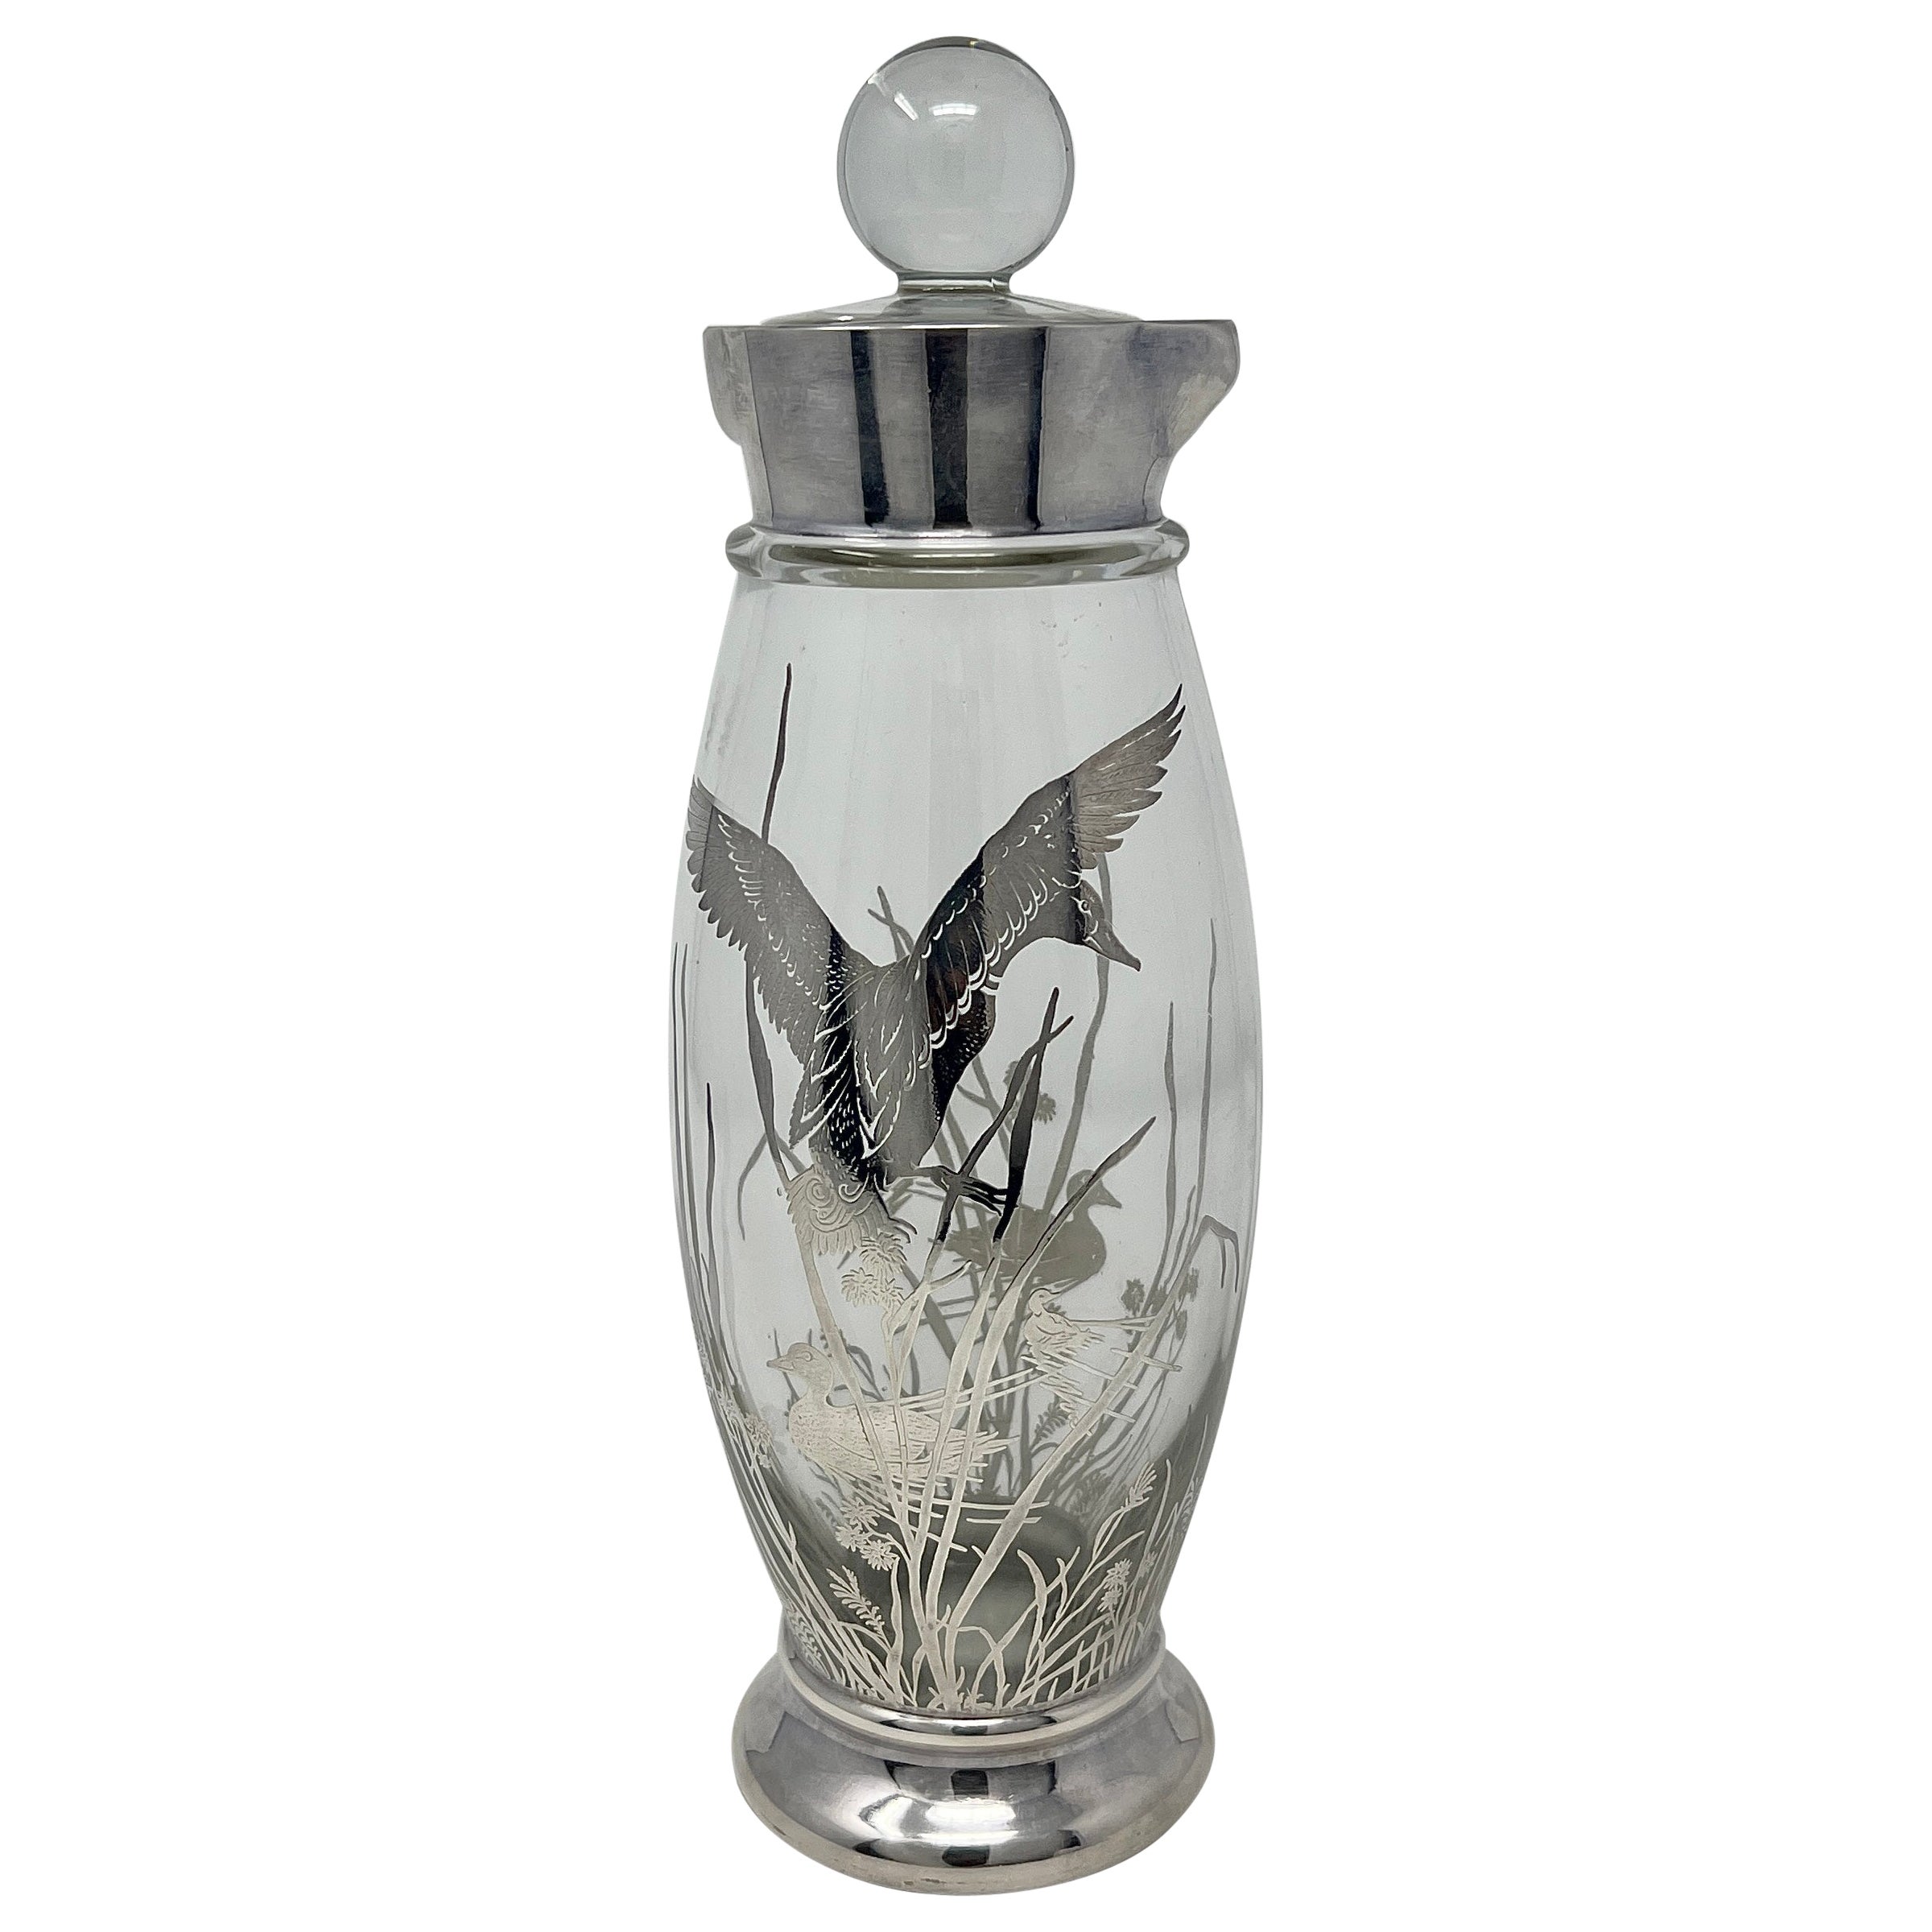 Estate Cut Crystal and Silver Overlay Cocktail Shaker with Ducks, Circa 1950's.